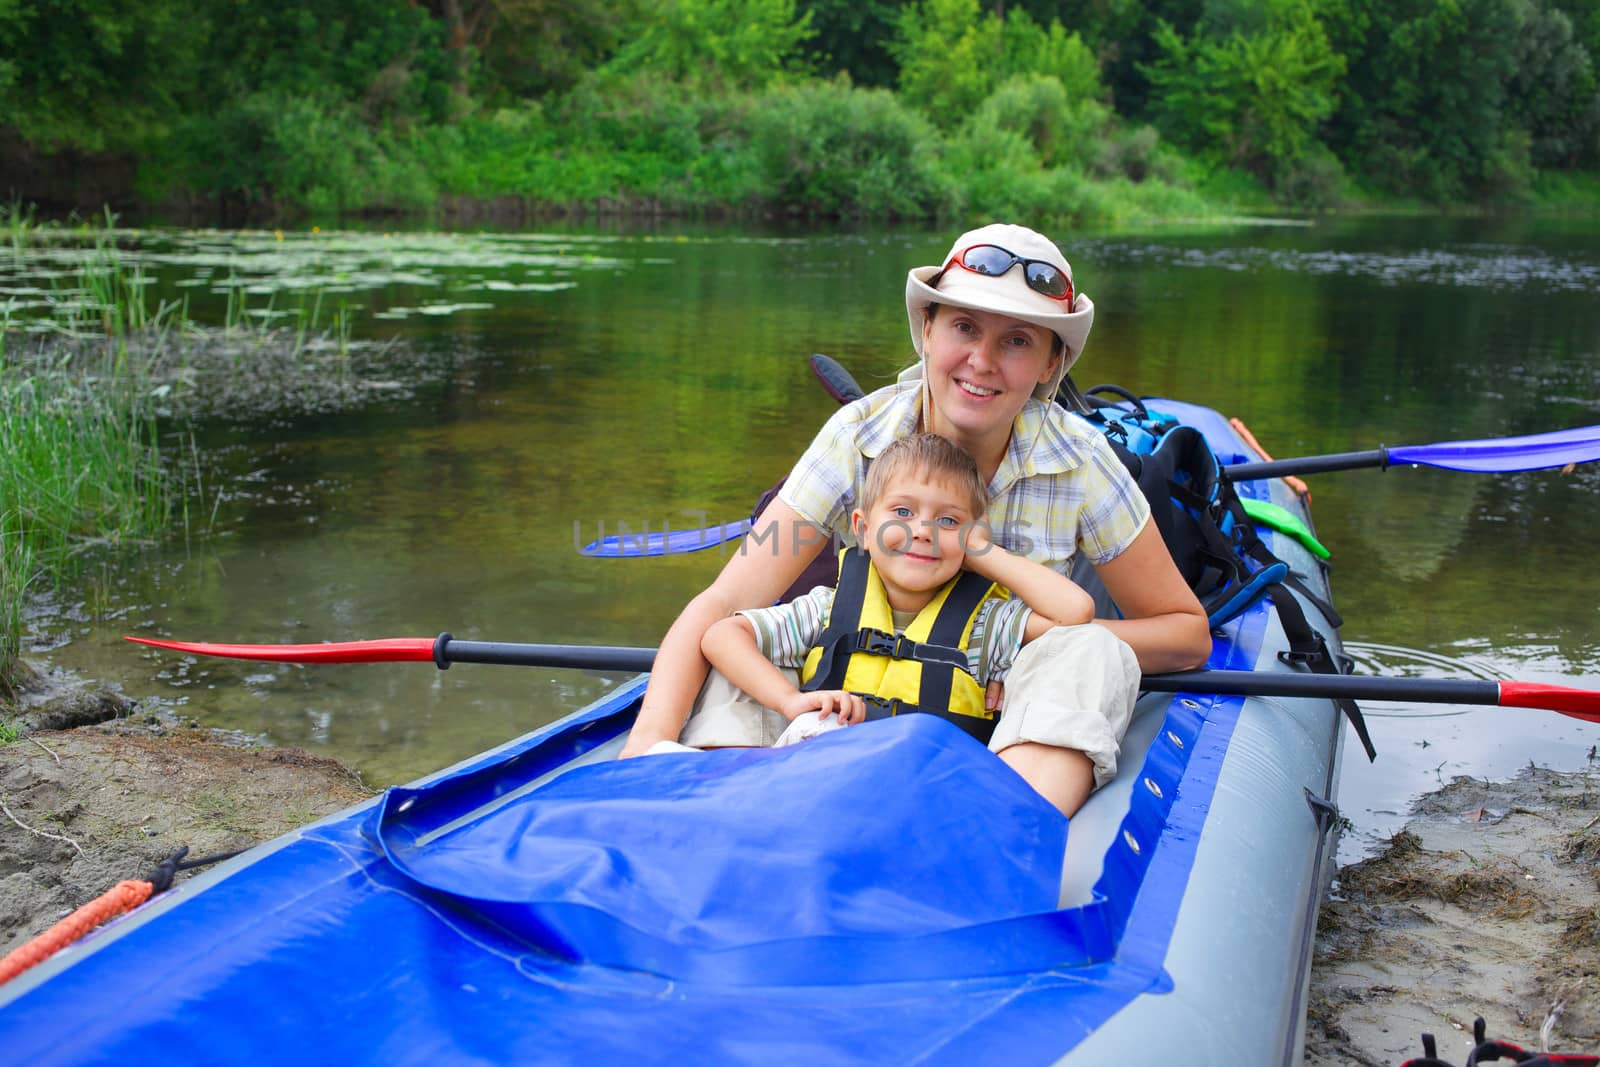 Happy young boy with mother paddling a kayak on the river, enjoying a lovely summer day